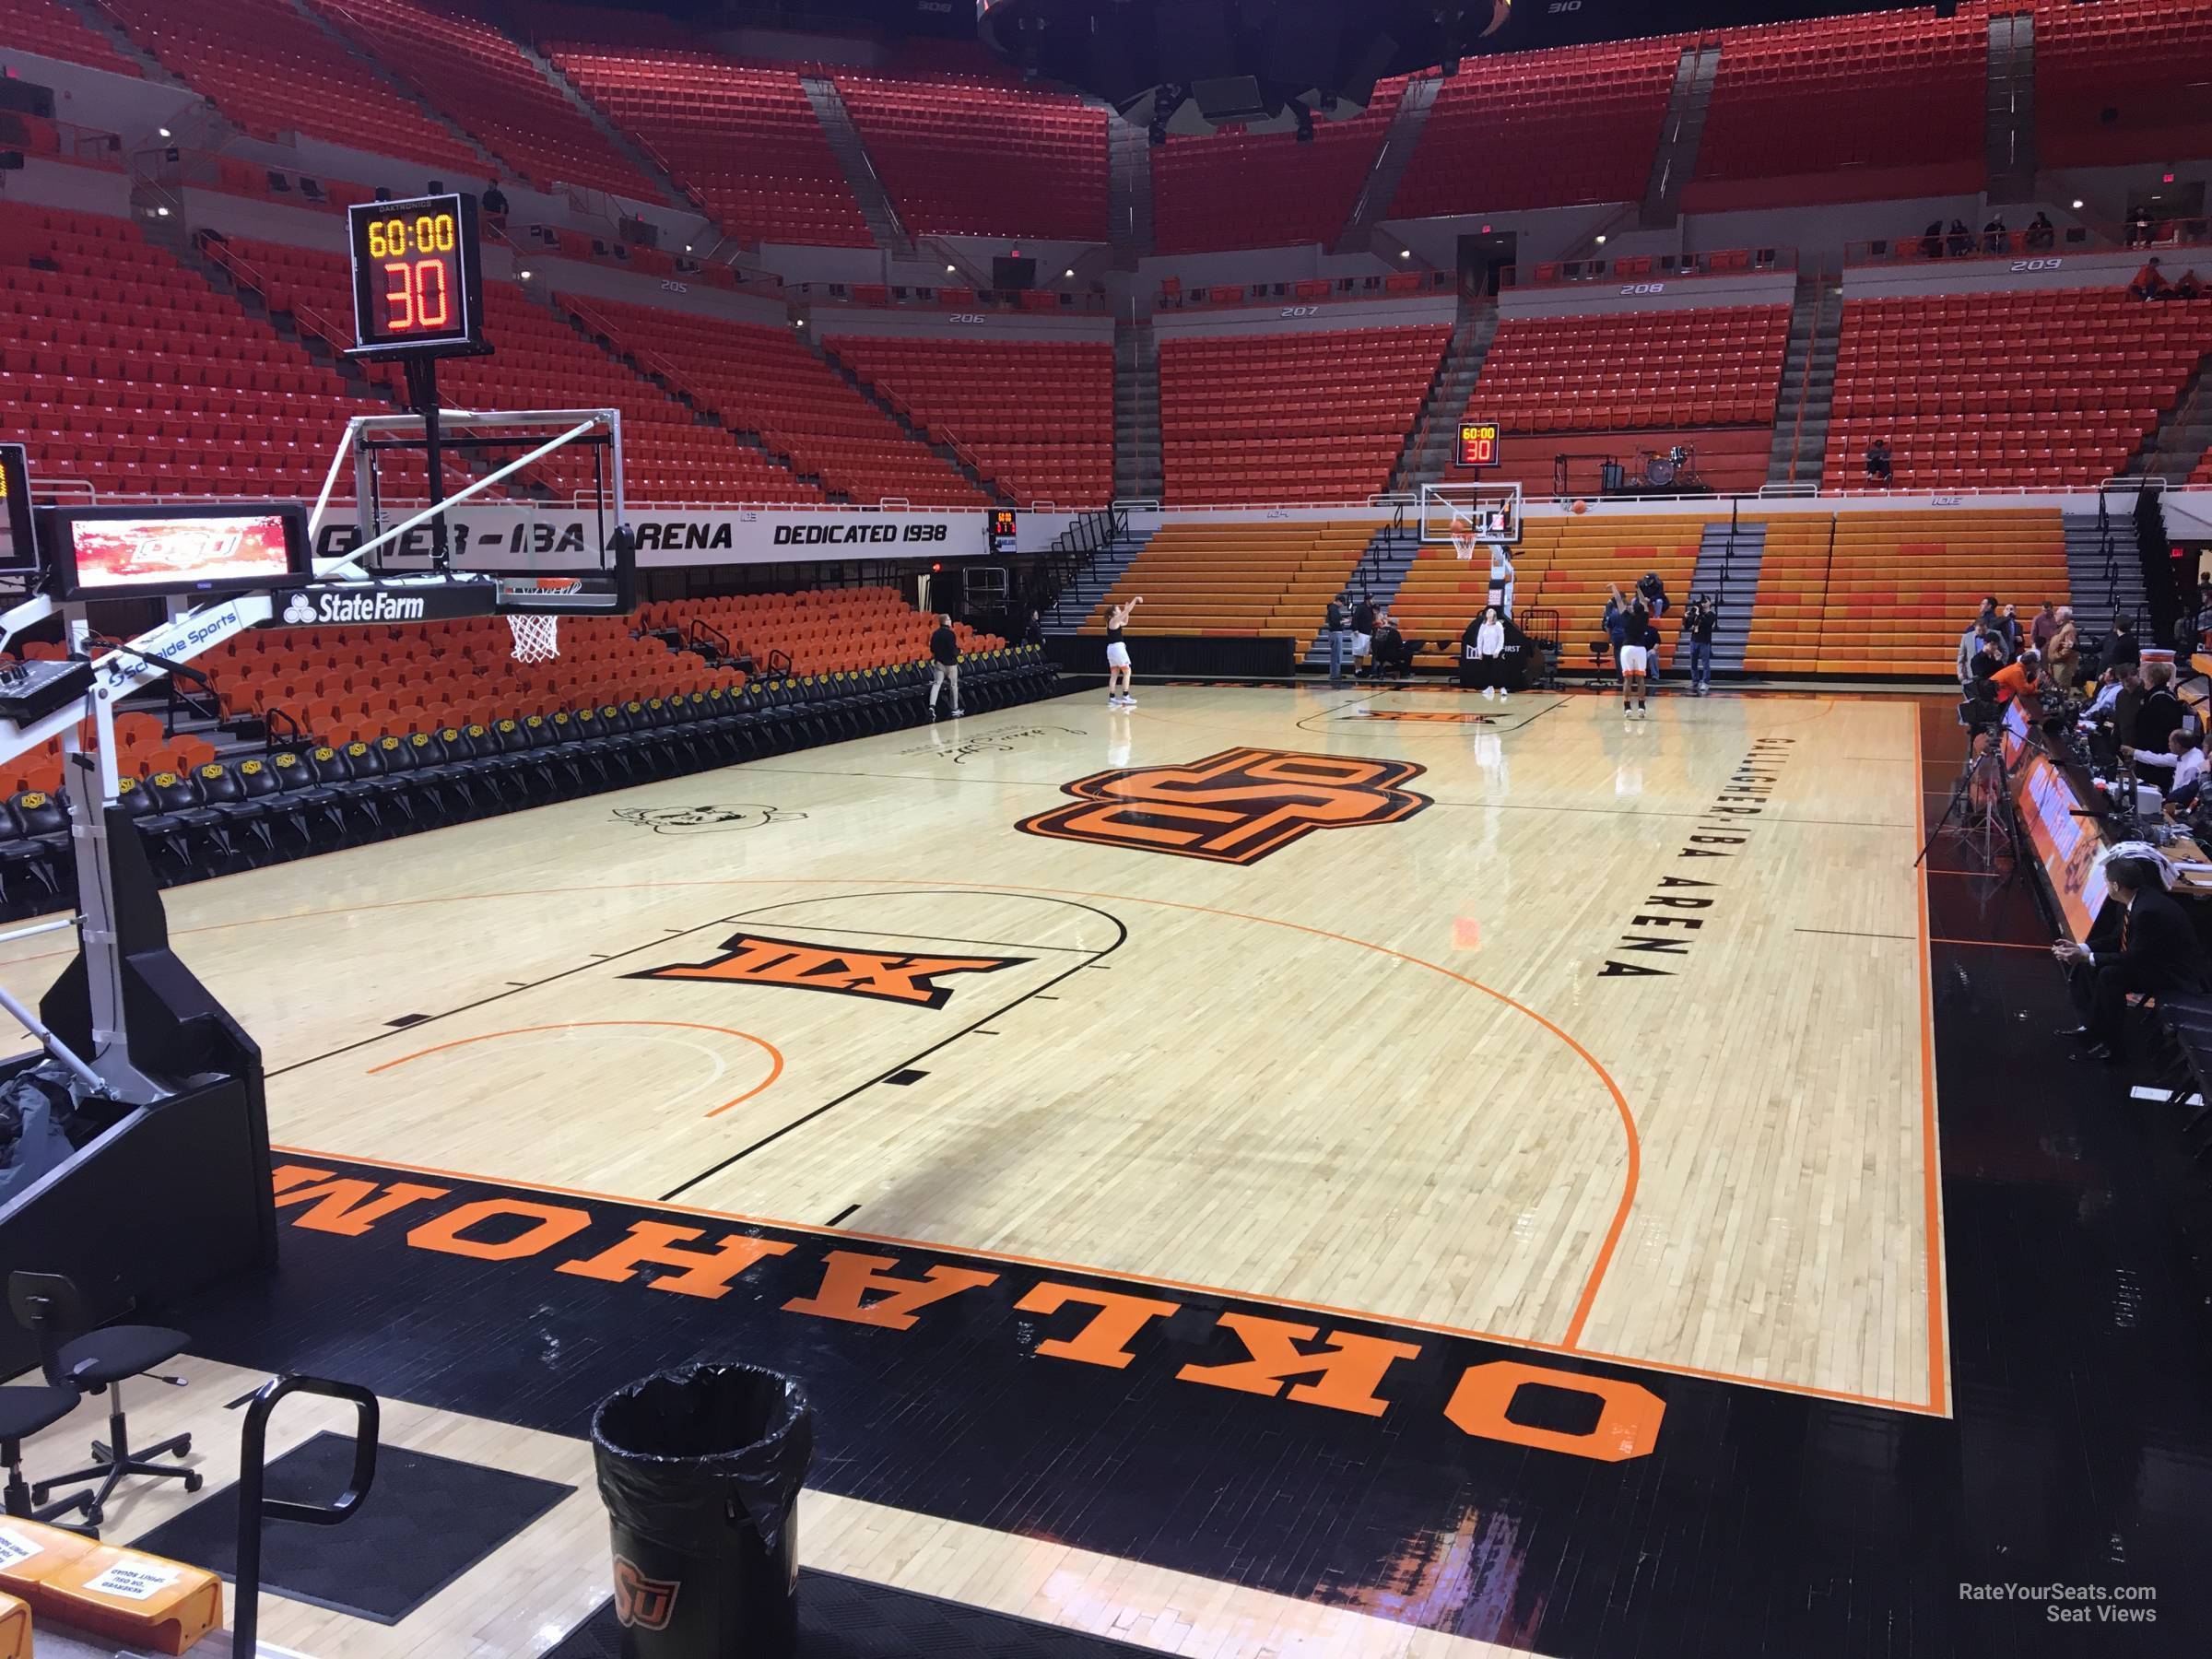 section 110, row 6 seat view  - gallagher-iba arena